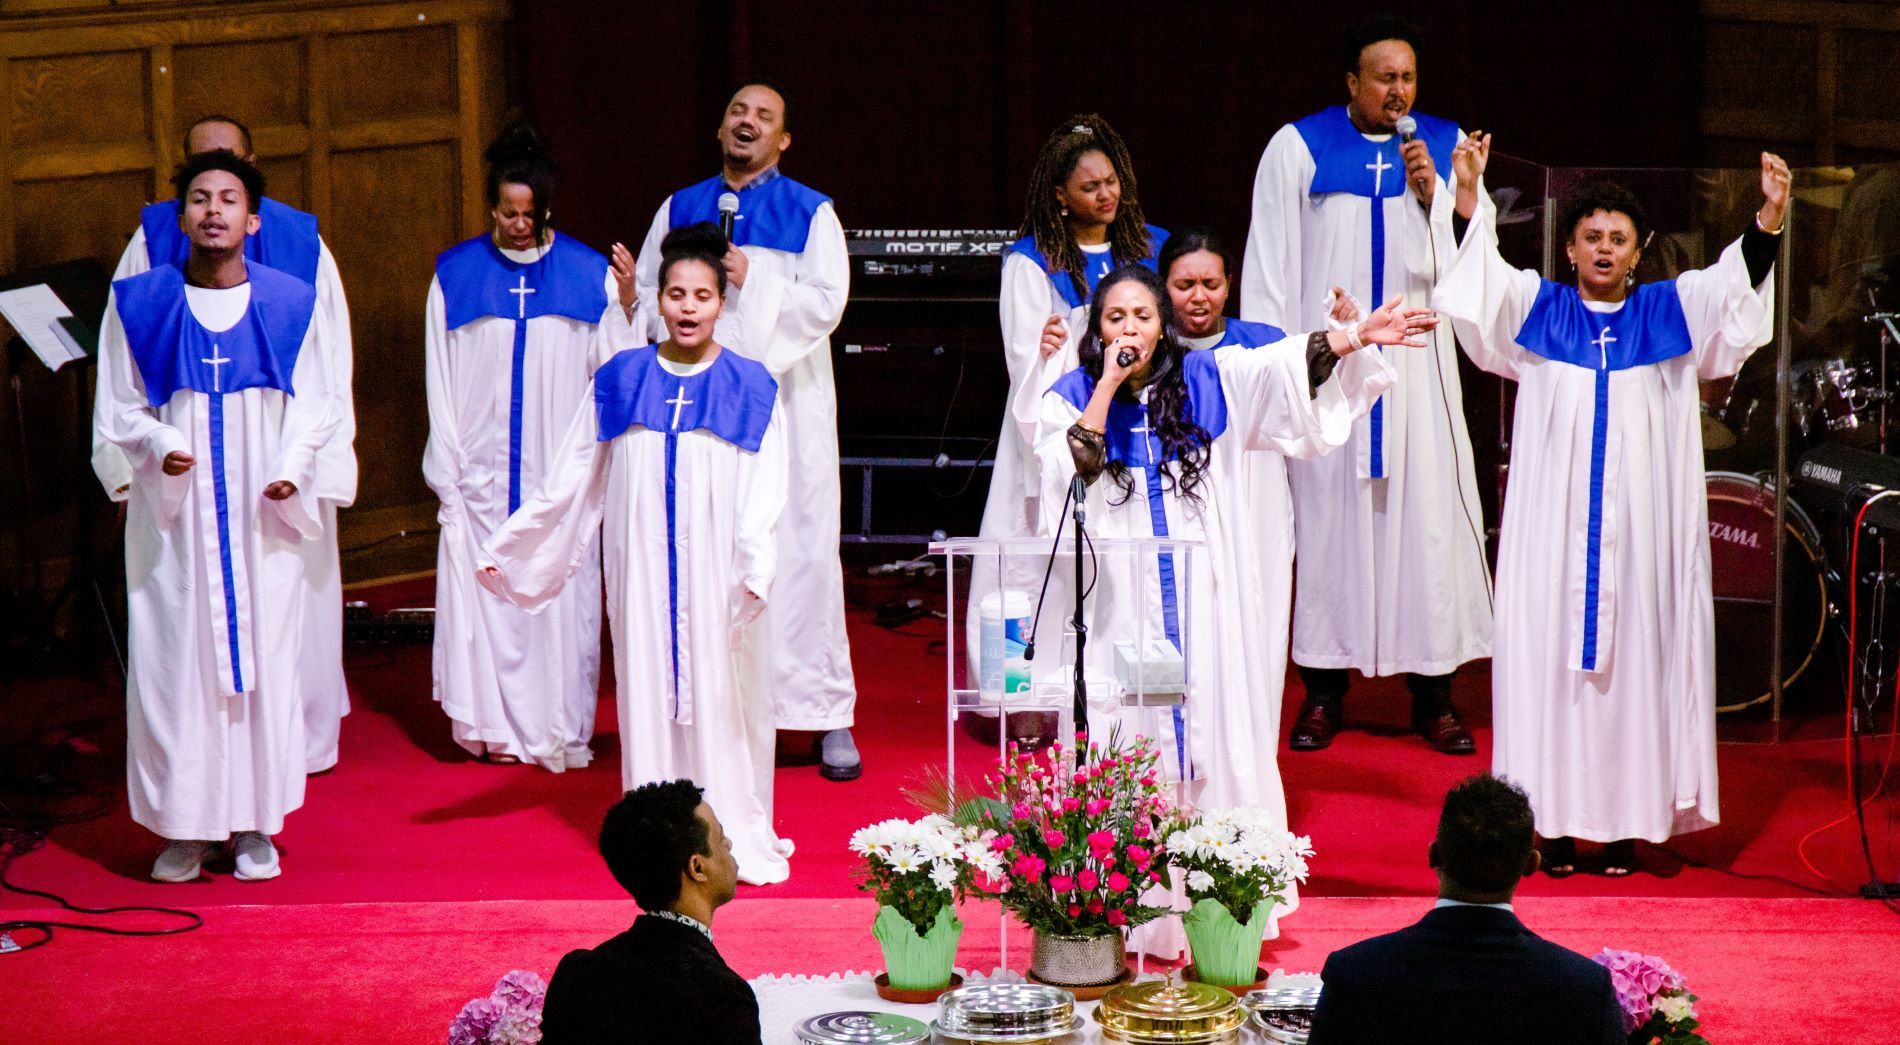 Choir wearing gowns worshipping on a stage